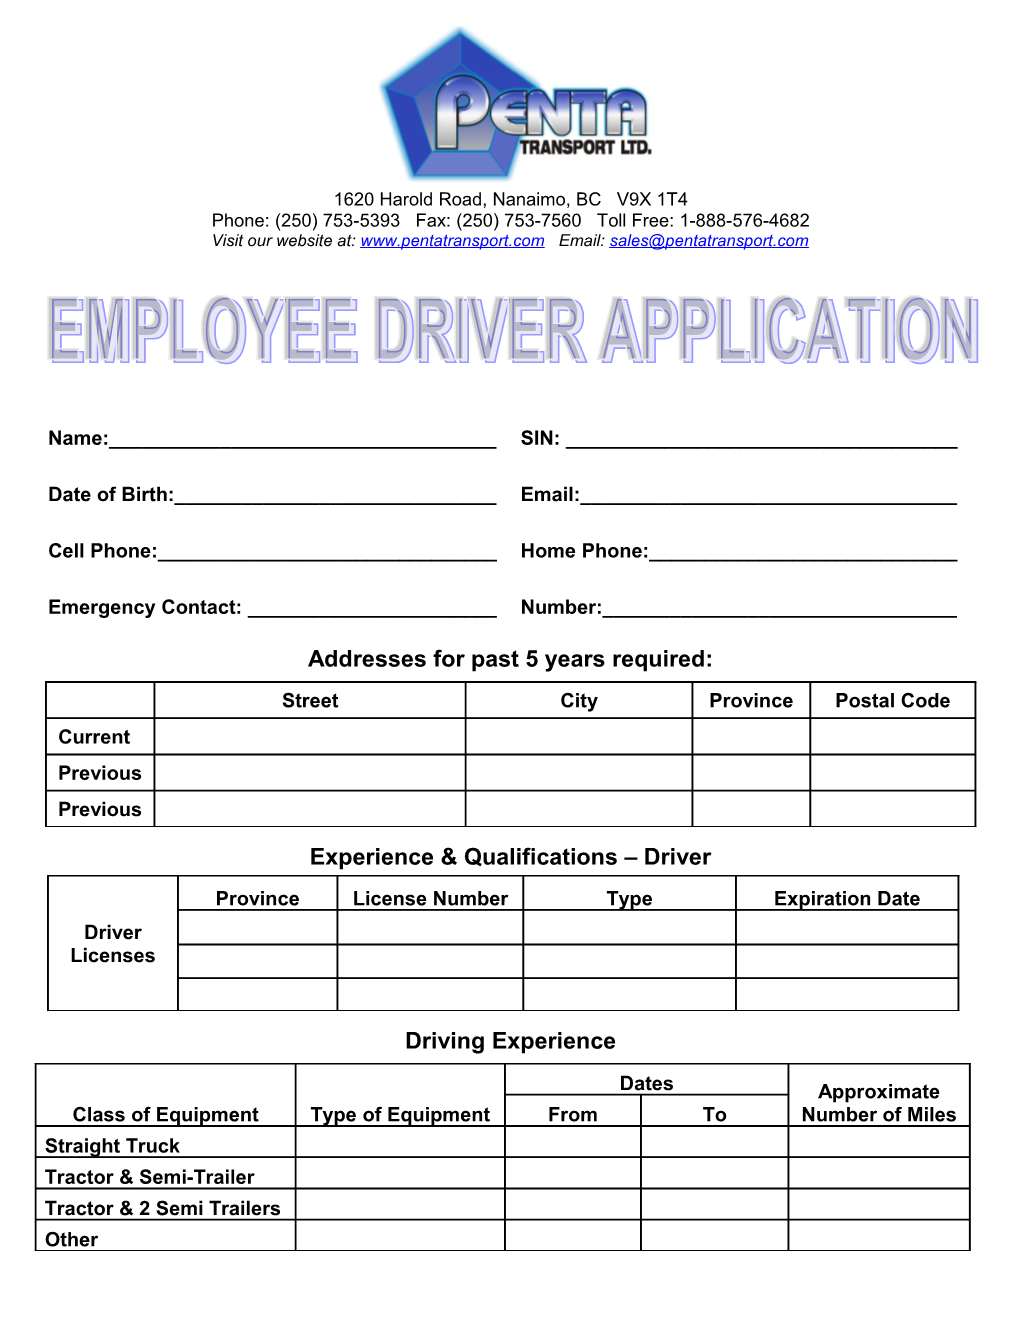 Employee Driver Application Page 2